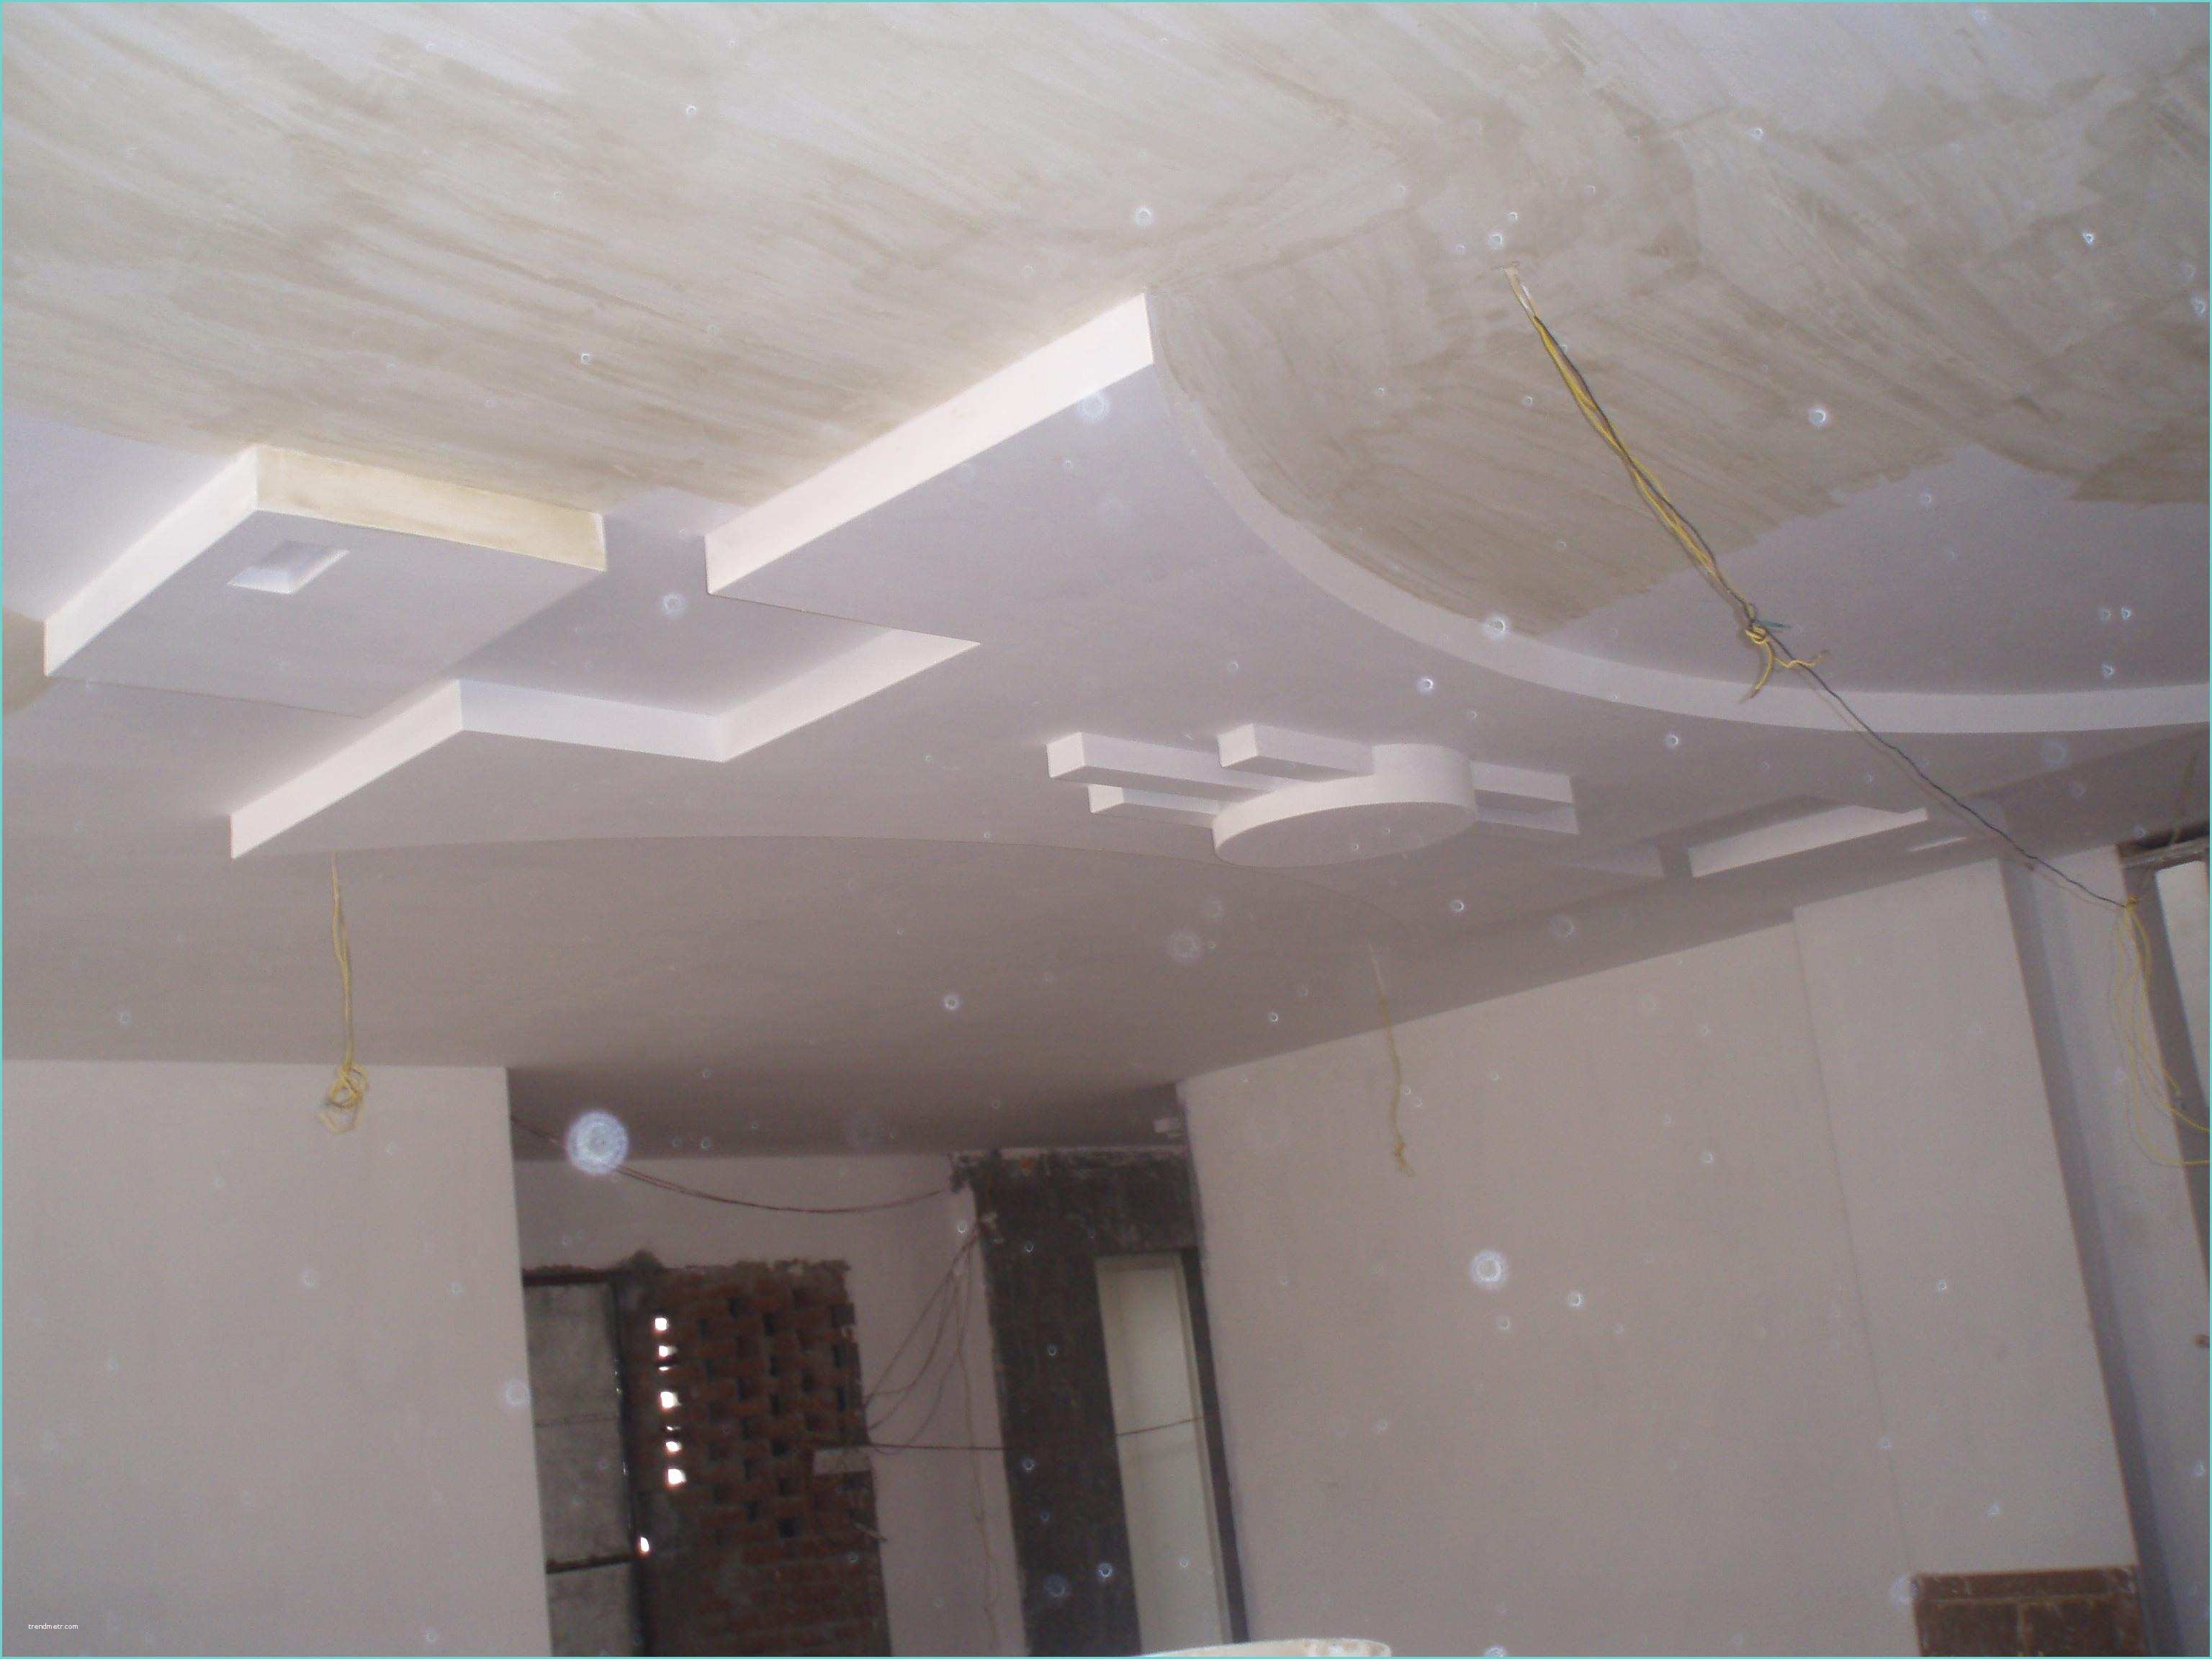 Design Of Pop On Roof Inspirations Pop Design for Hall without False Ceiling